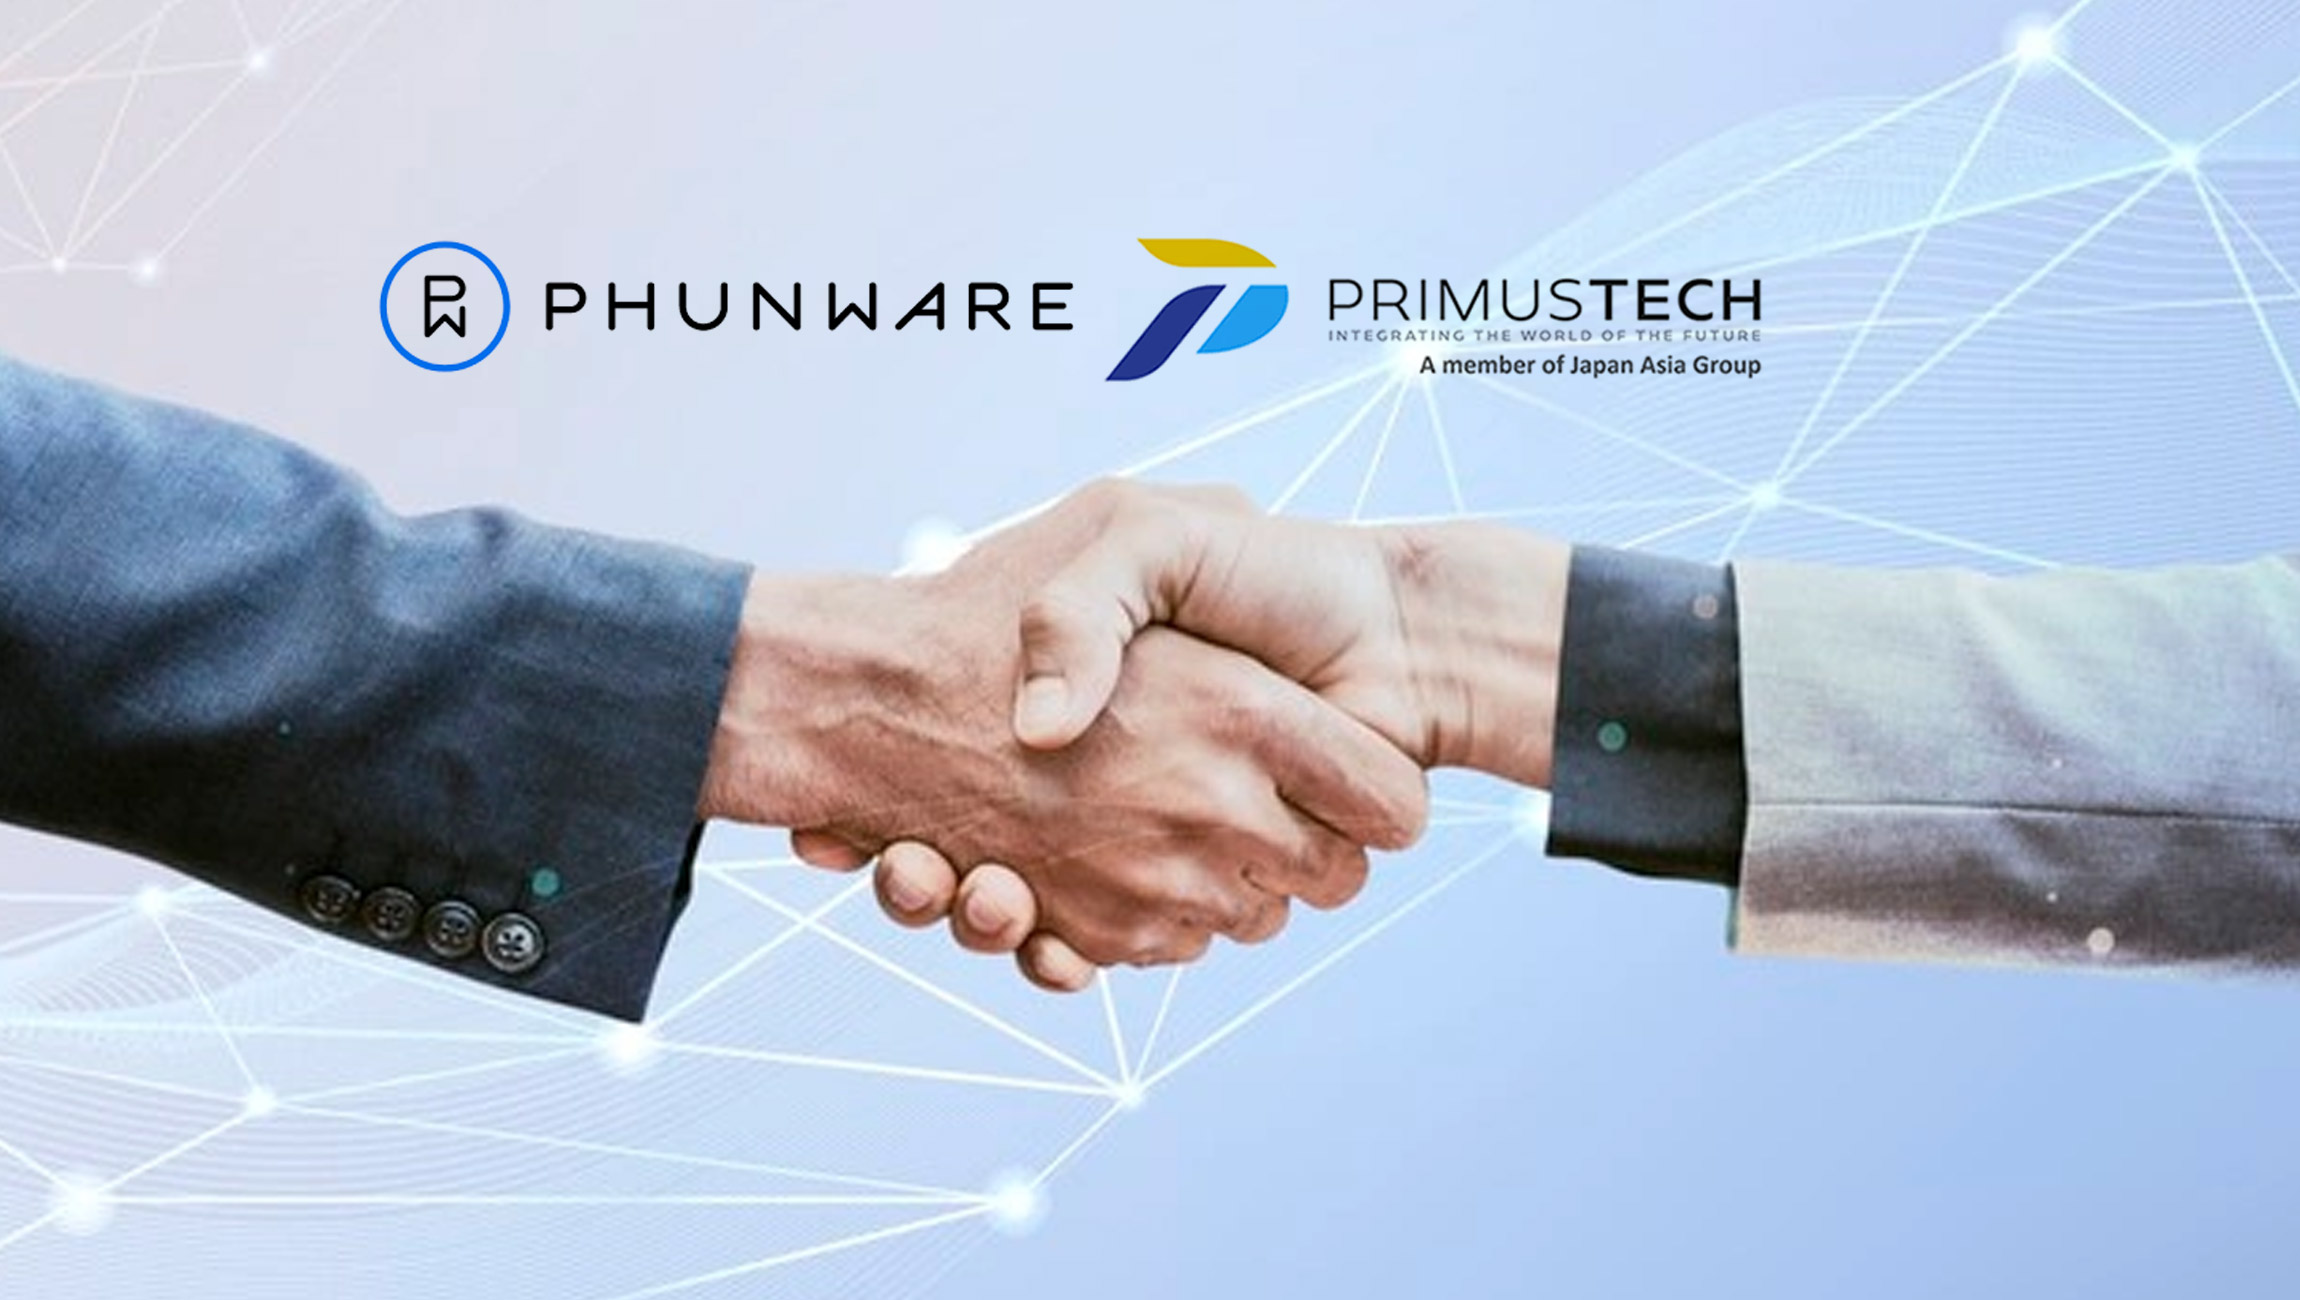 Phunware Announces Partnership with PrimusTech to Integrate Mobile Smart Solutions in Asia